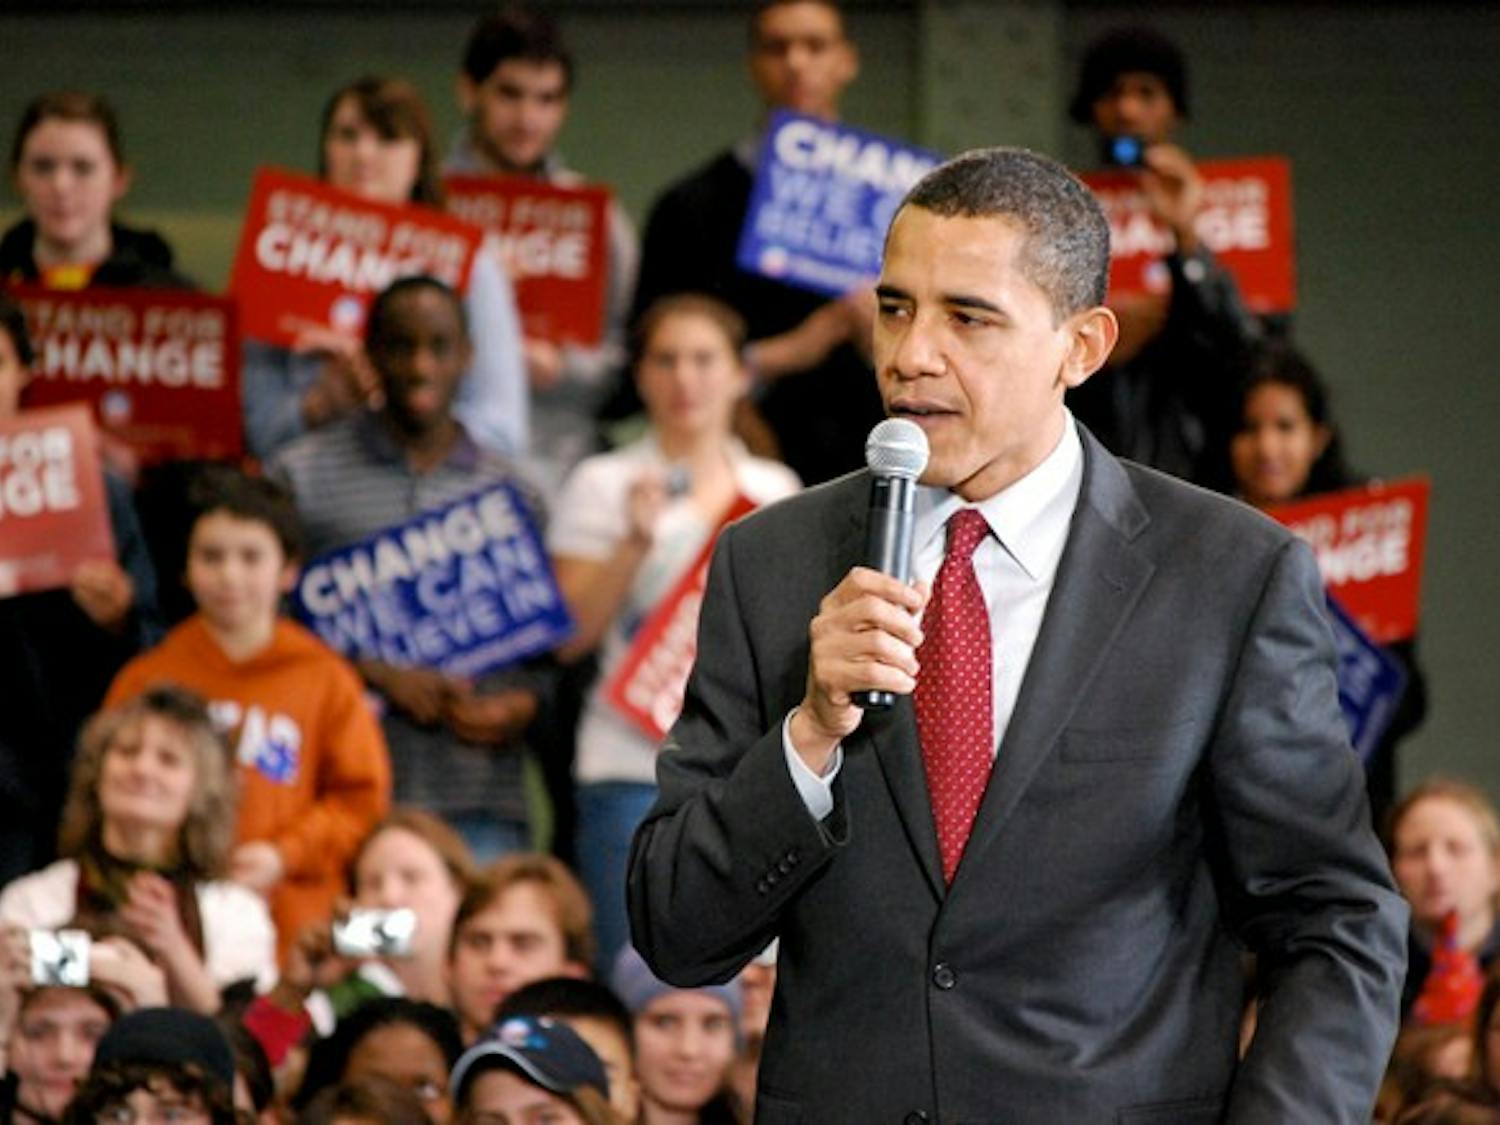 Sen. Barack Obama, D-Ill., spoke to a student-dominated crowd Tuesday morning shortly after polls opened for the New Hampshire primary.